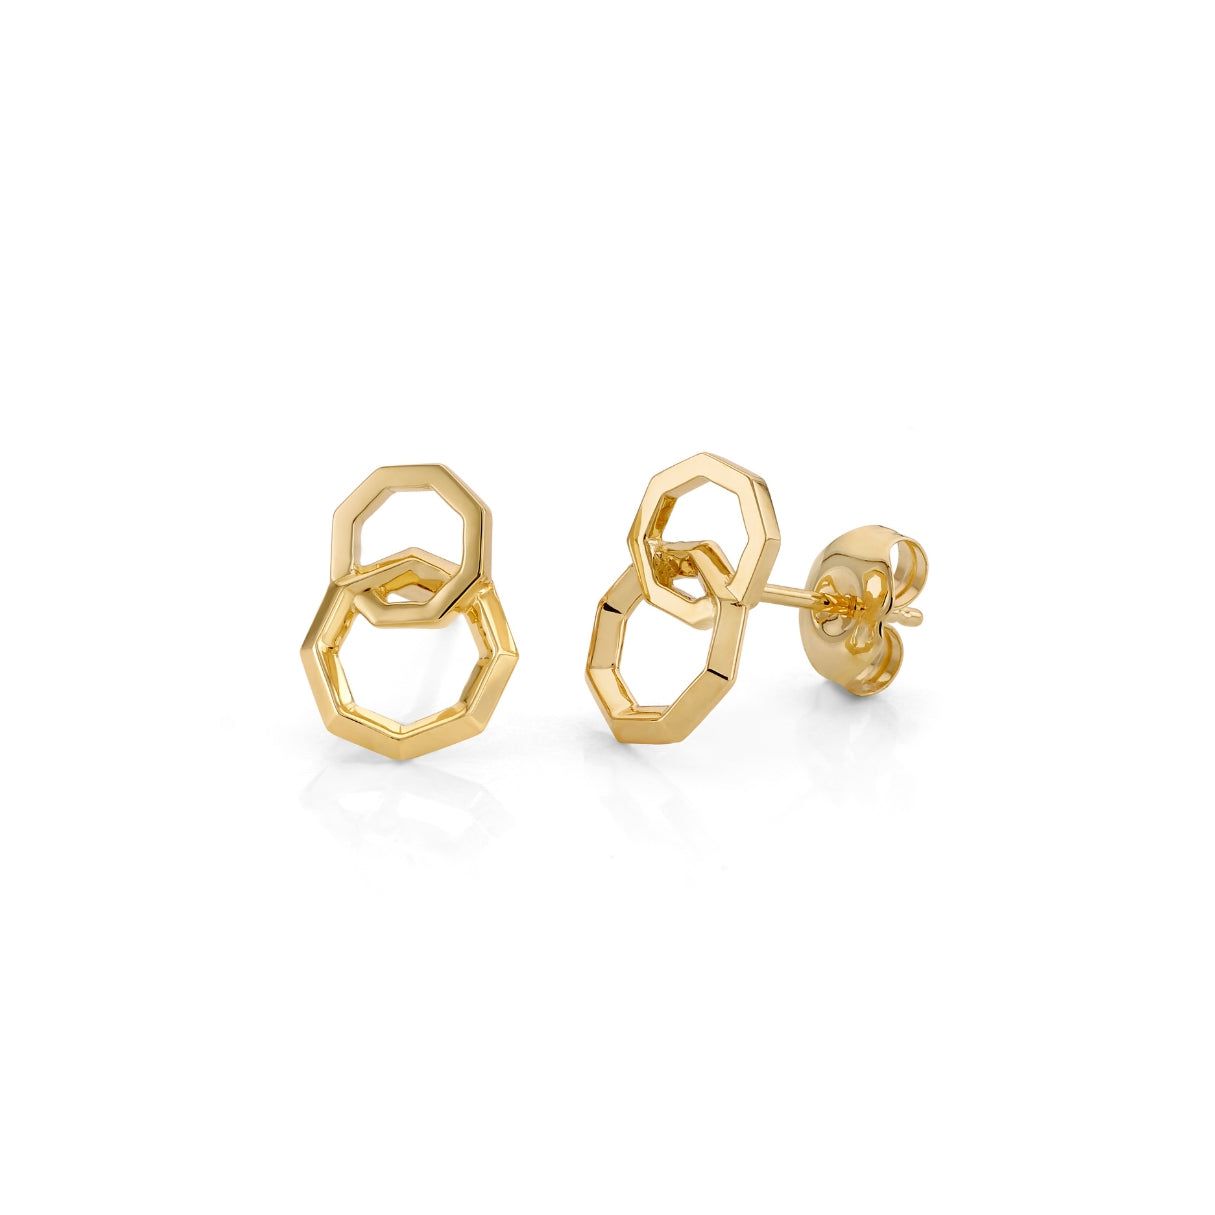 MICHAEL M Fashion Rings 14K Yellow Gold Double Octave Earrings